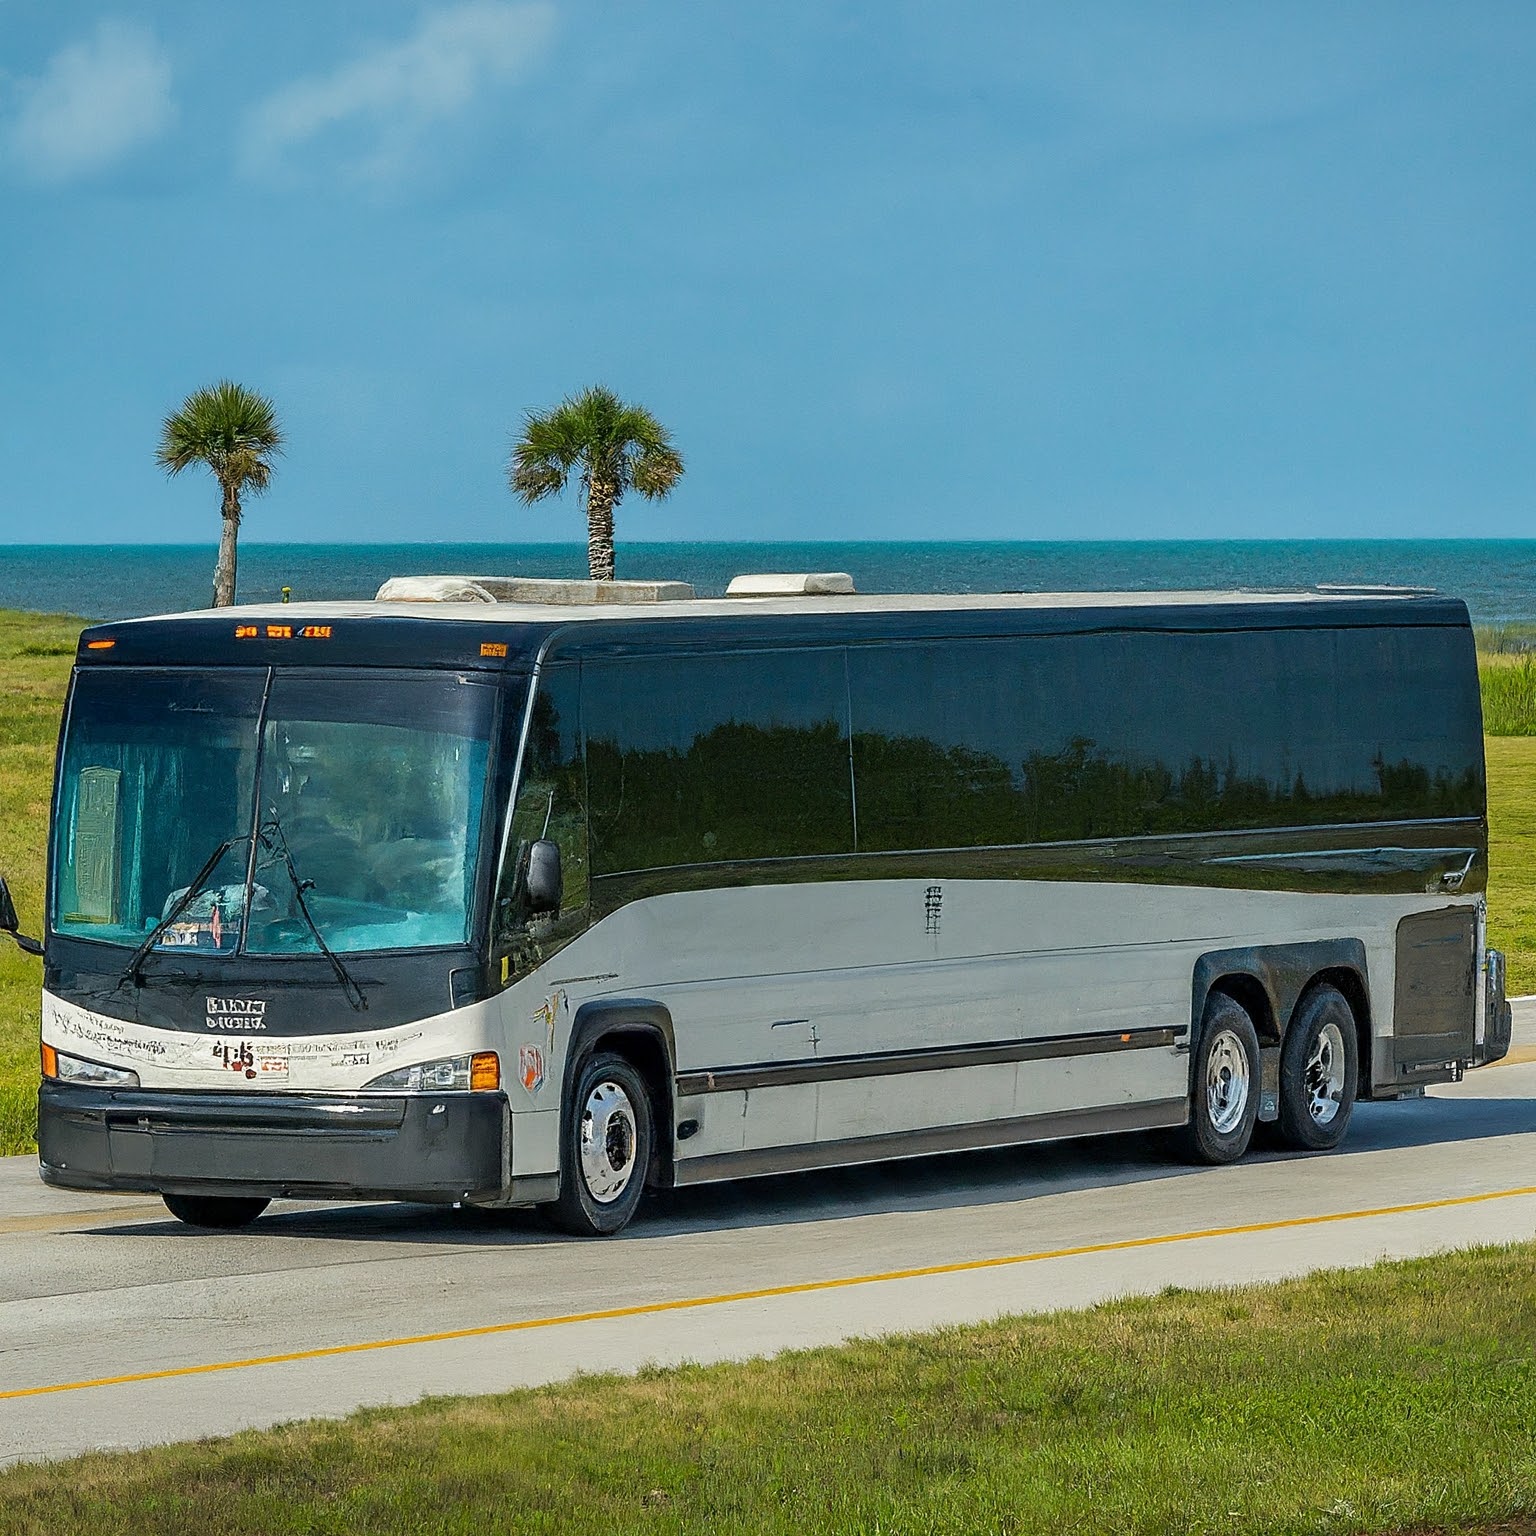 How much is a shuttle from Houston to Galveston?